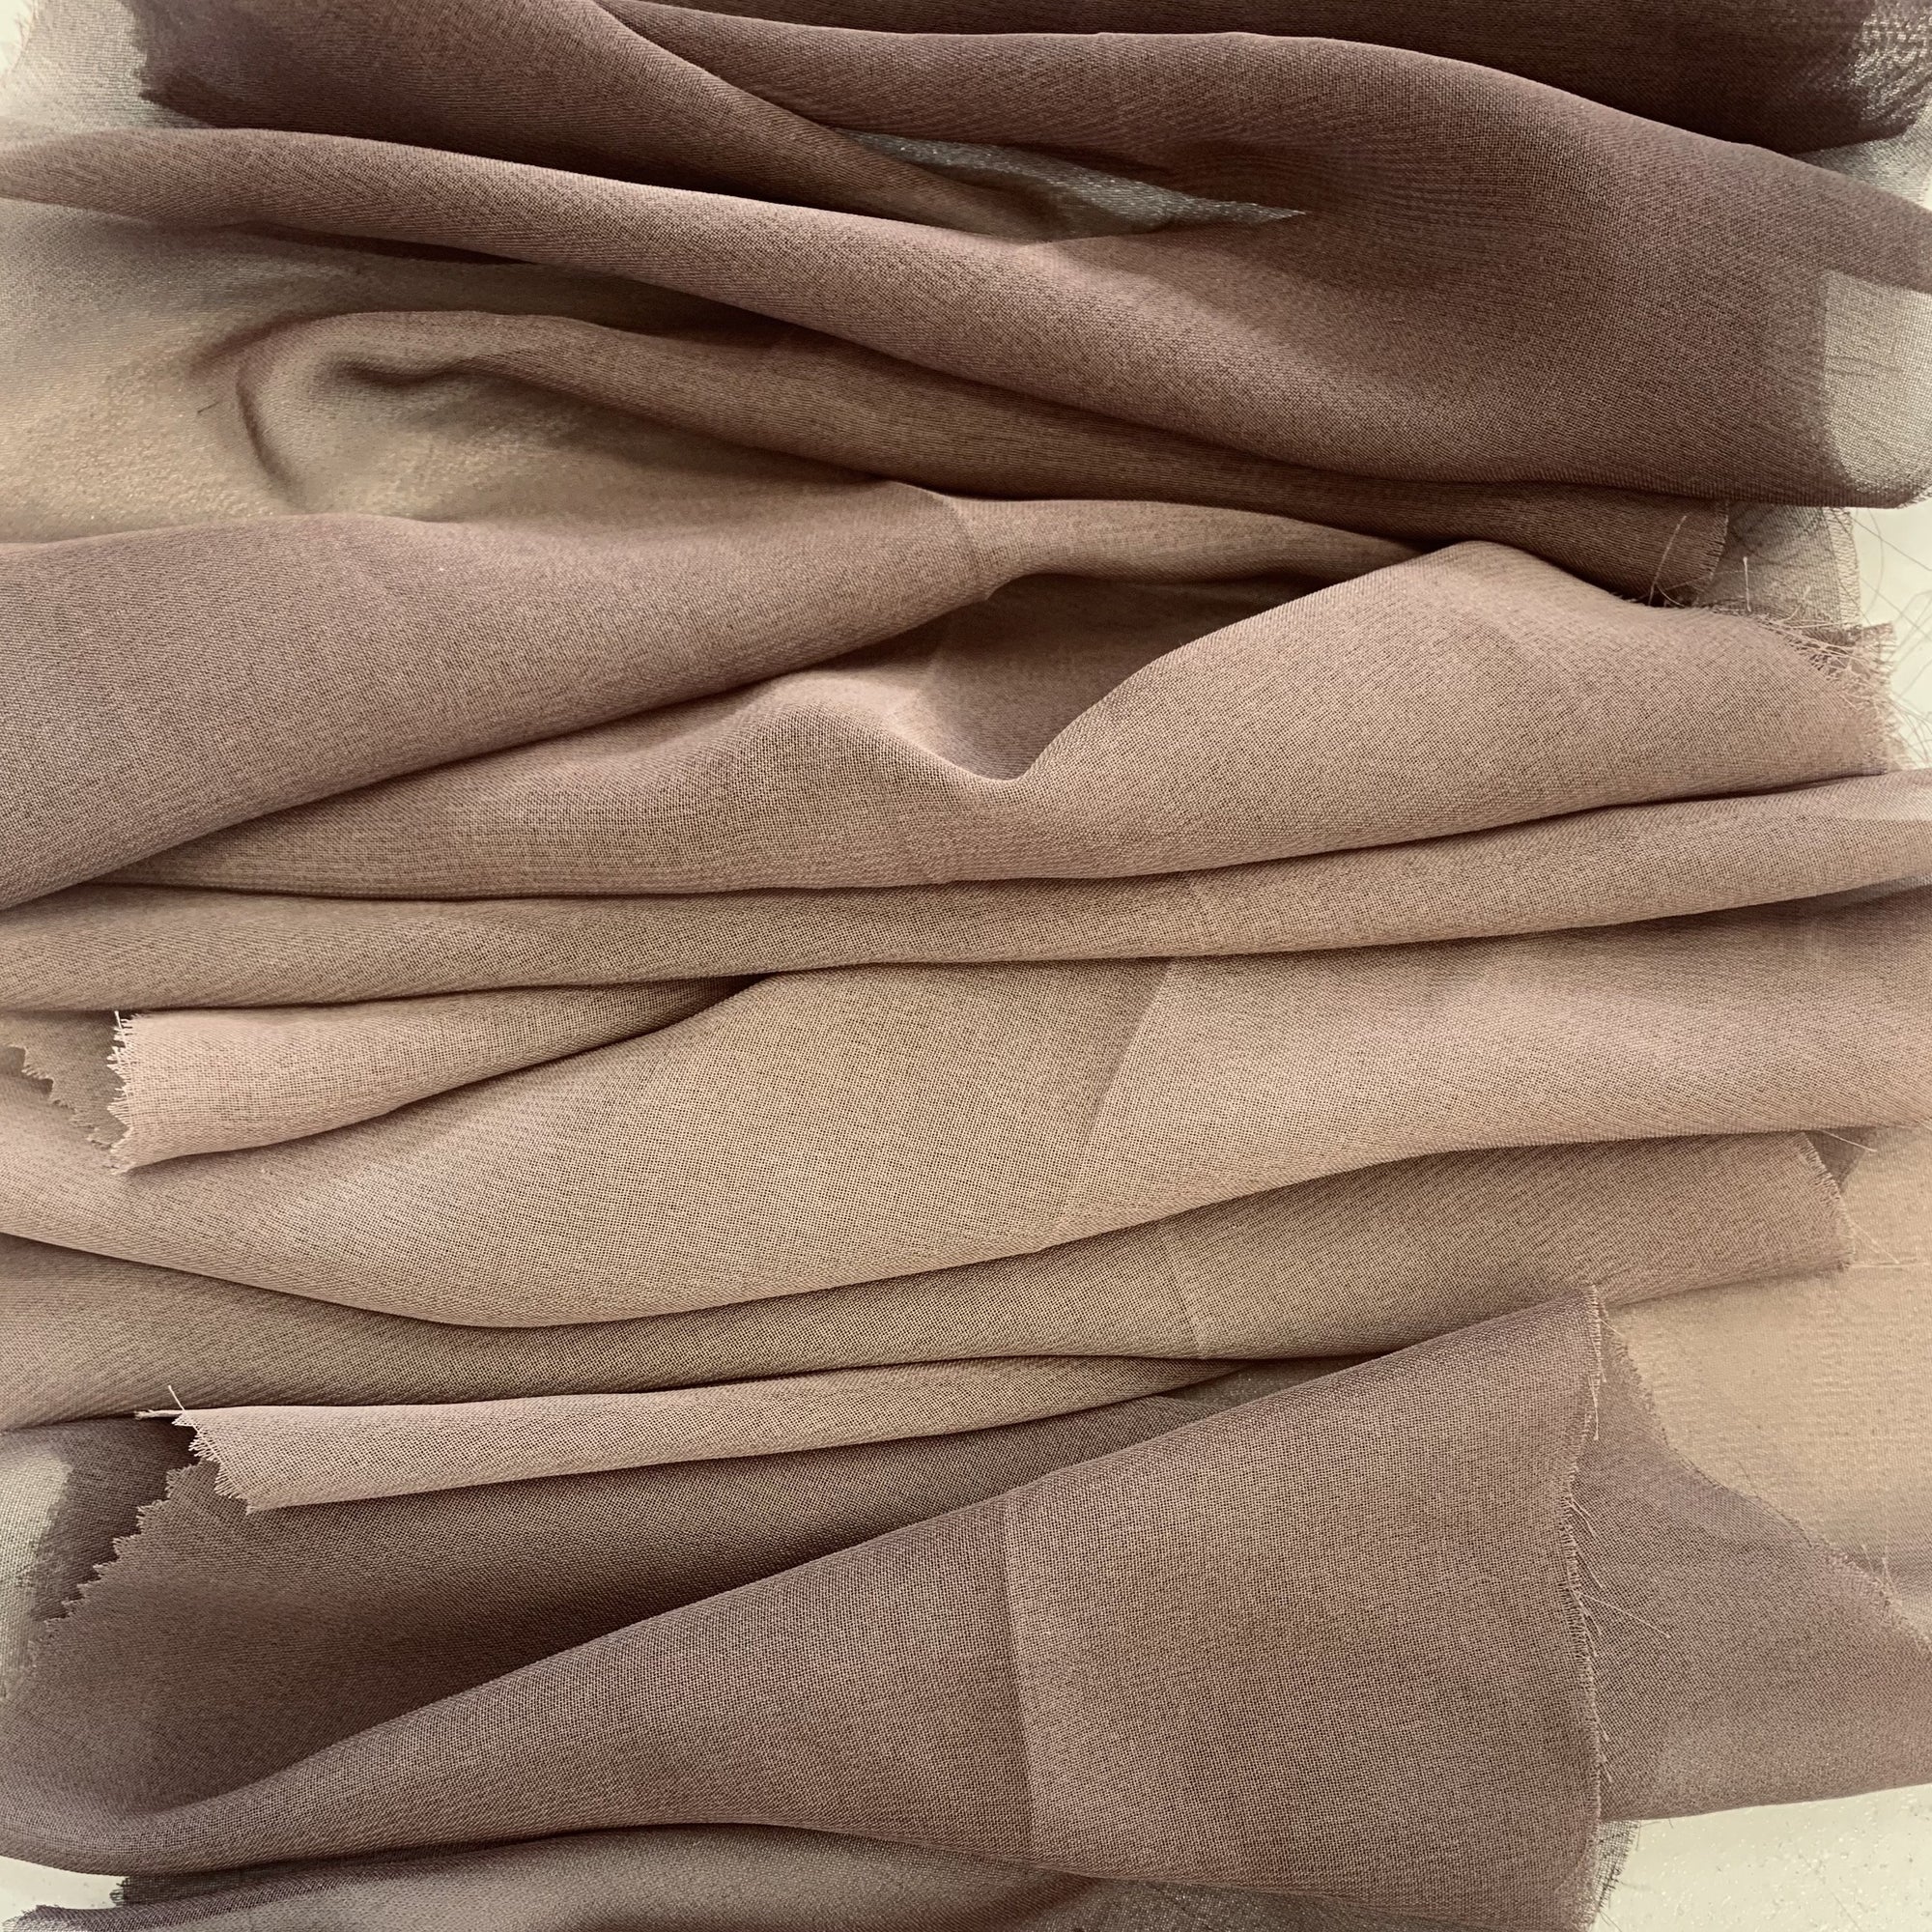 ombre displaying the chocolate colored version of Ombré dip dyed sheer and soft pure polyester chiffon